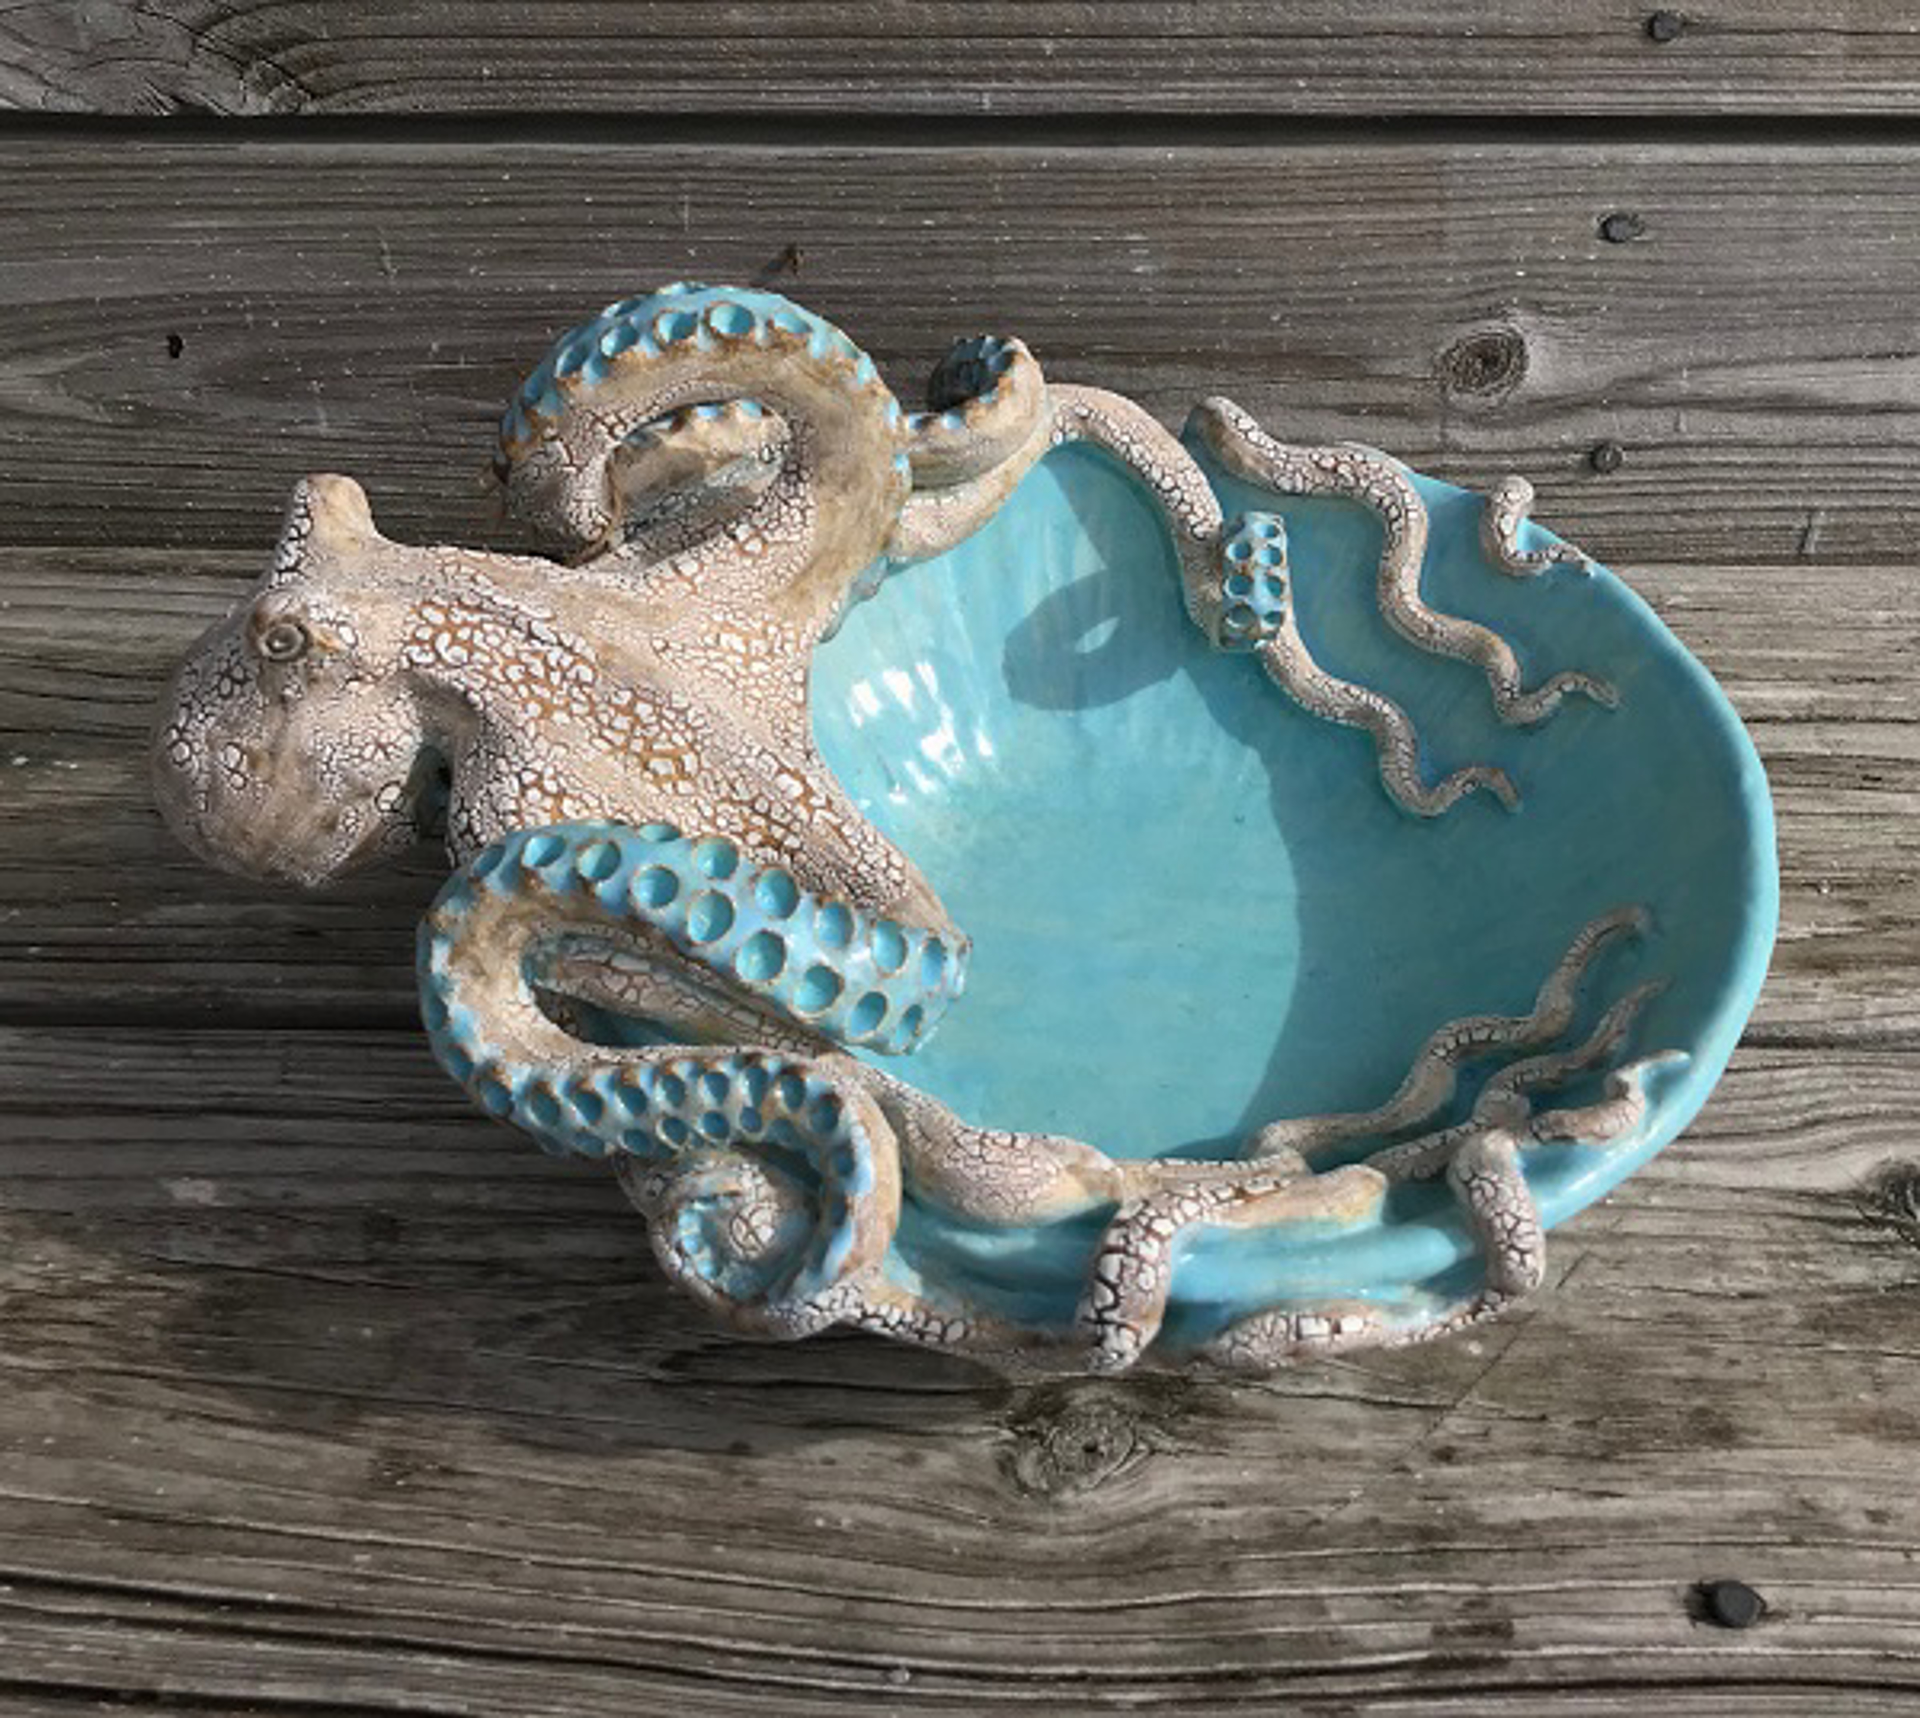 Large Octopus Bowl Caribbean Blue by Shayne Greco